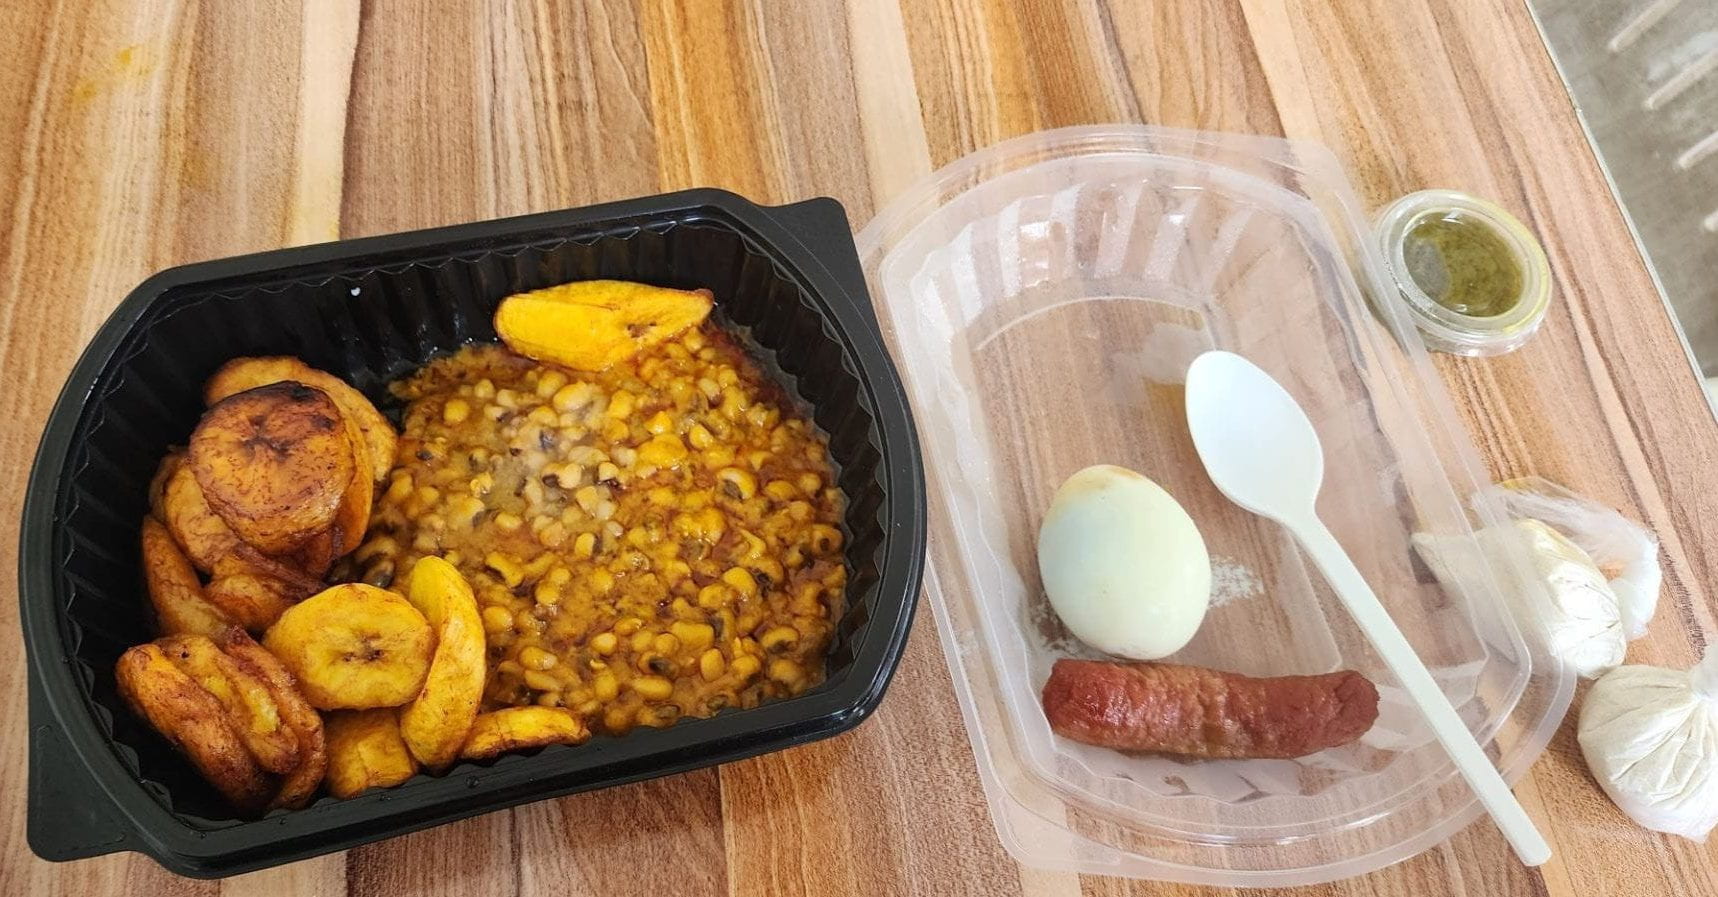 A takeout box containing black eyed peas and fried plantains. The lid is to the right containing a hard-boiled egg and a chicken sausage.